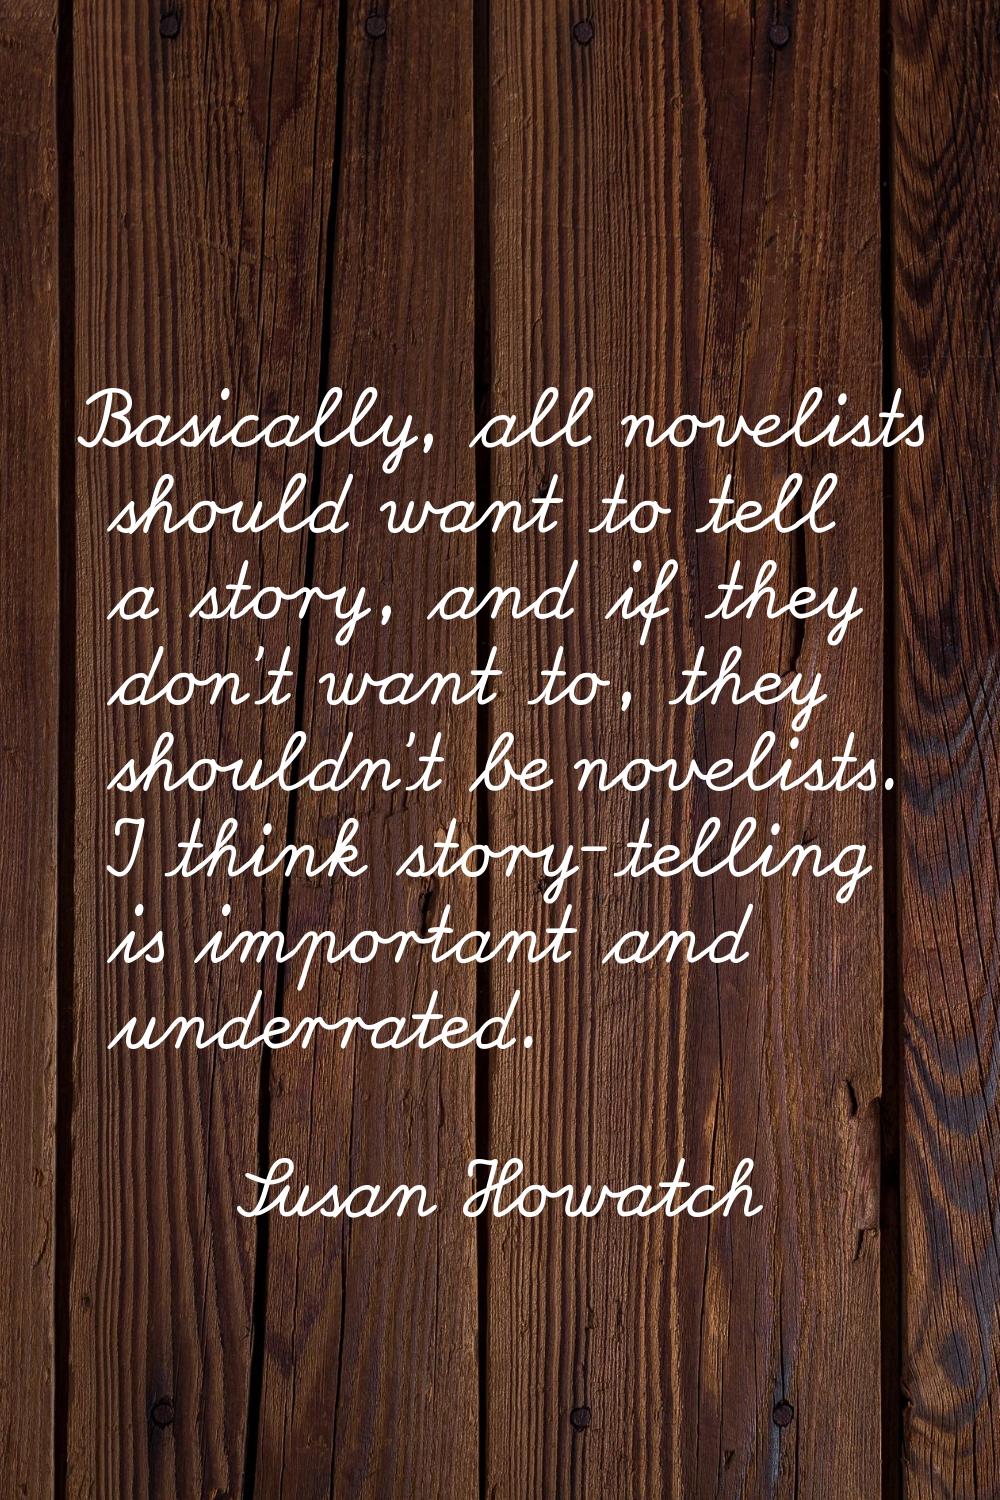 Basically, all novelists should want to tell a story, and if they don't want to, they shouldn't be 